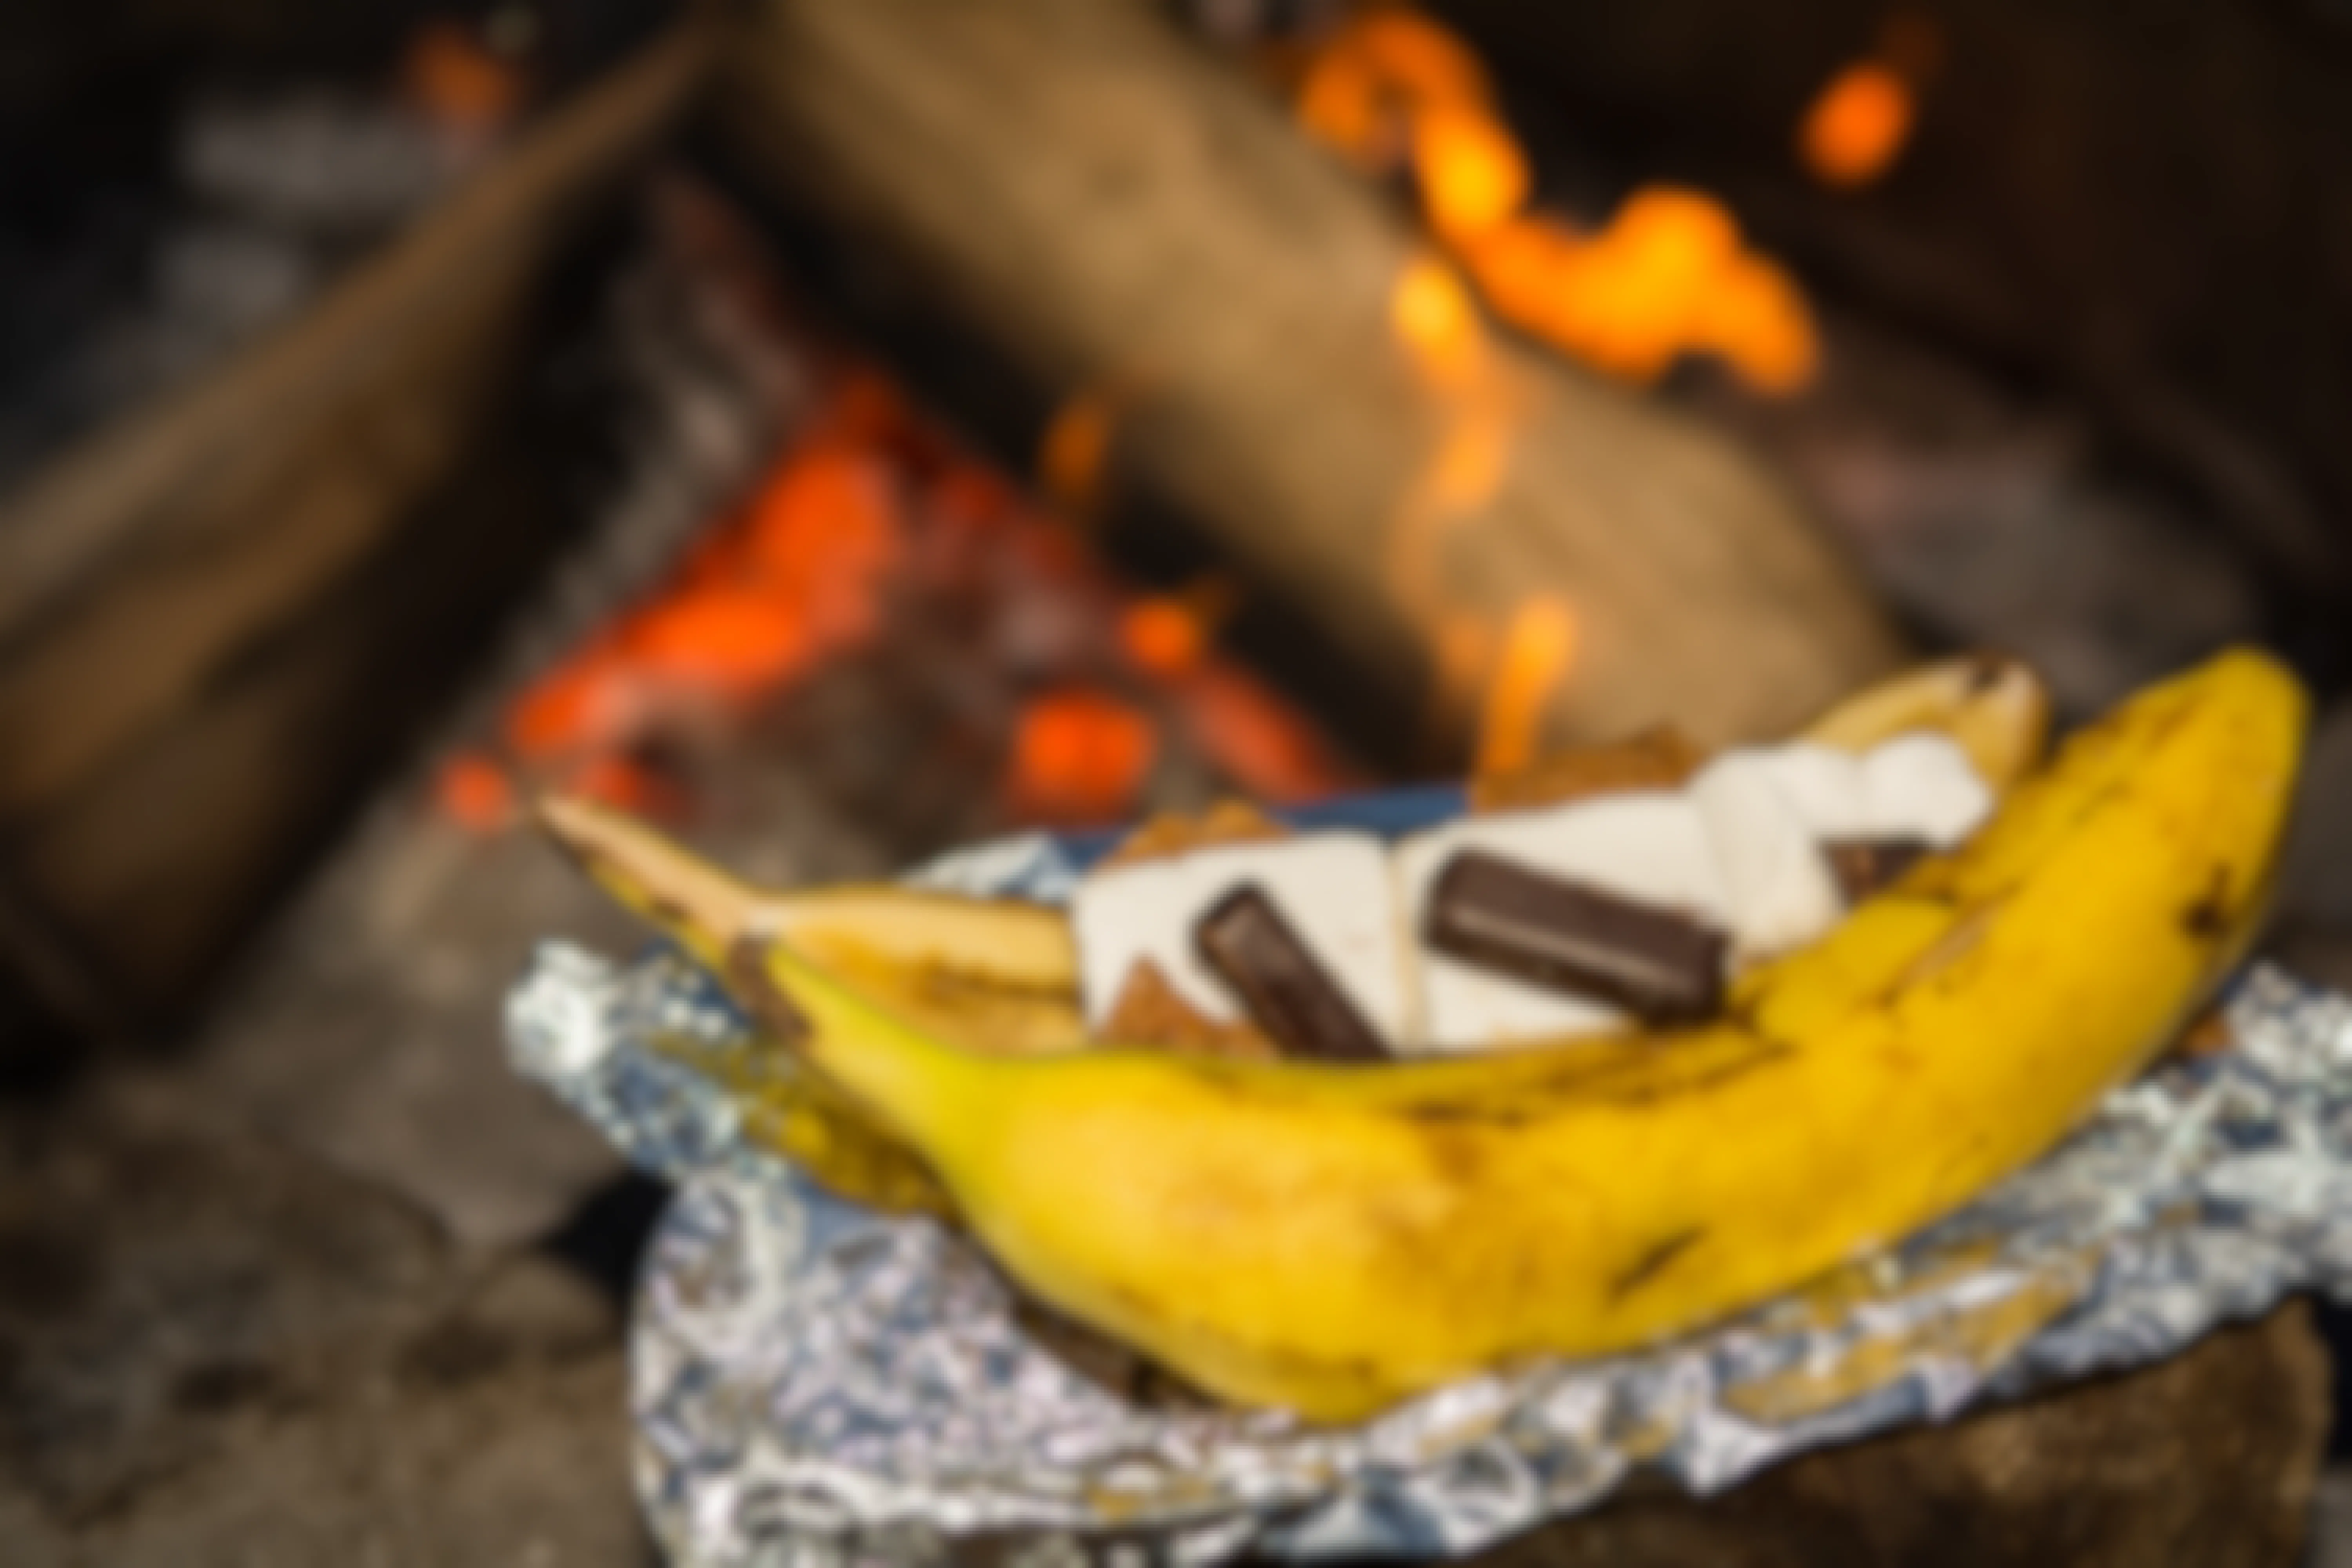 A banana cut in half, with chocolate and marshmallows inside, sitting on aluminum foil next to a campfire